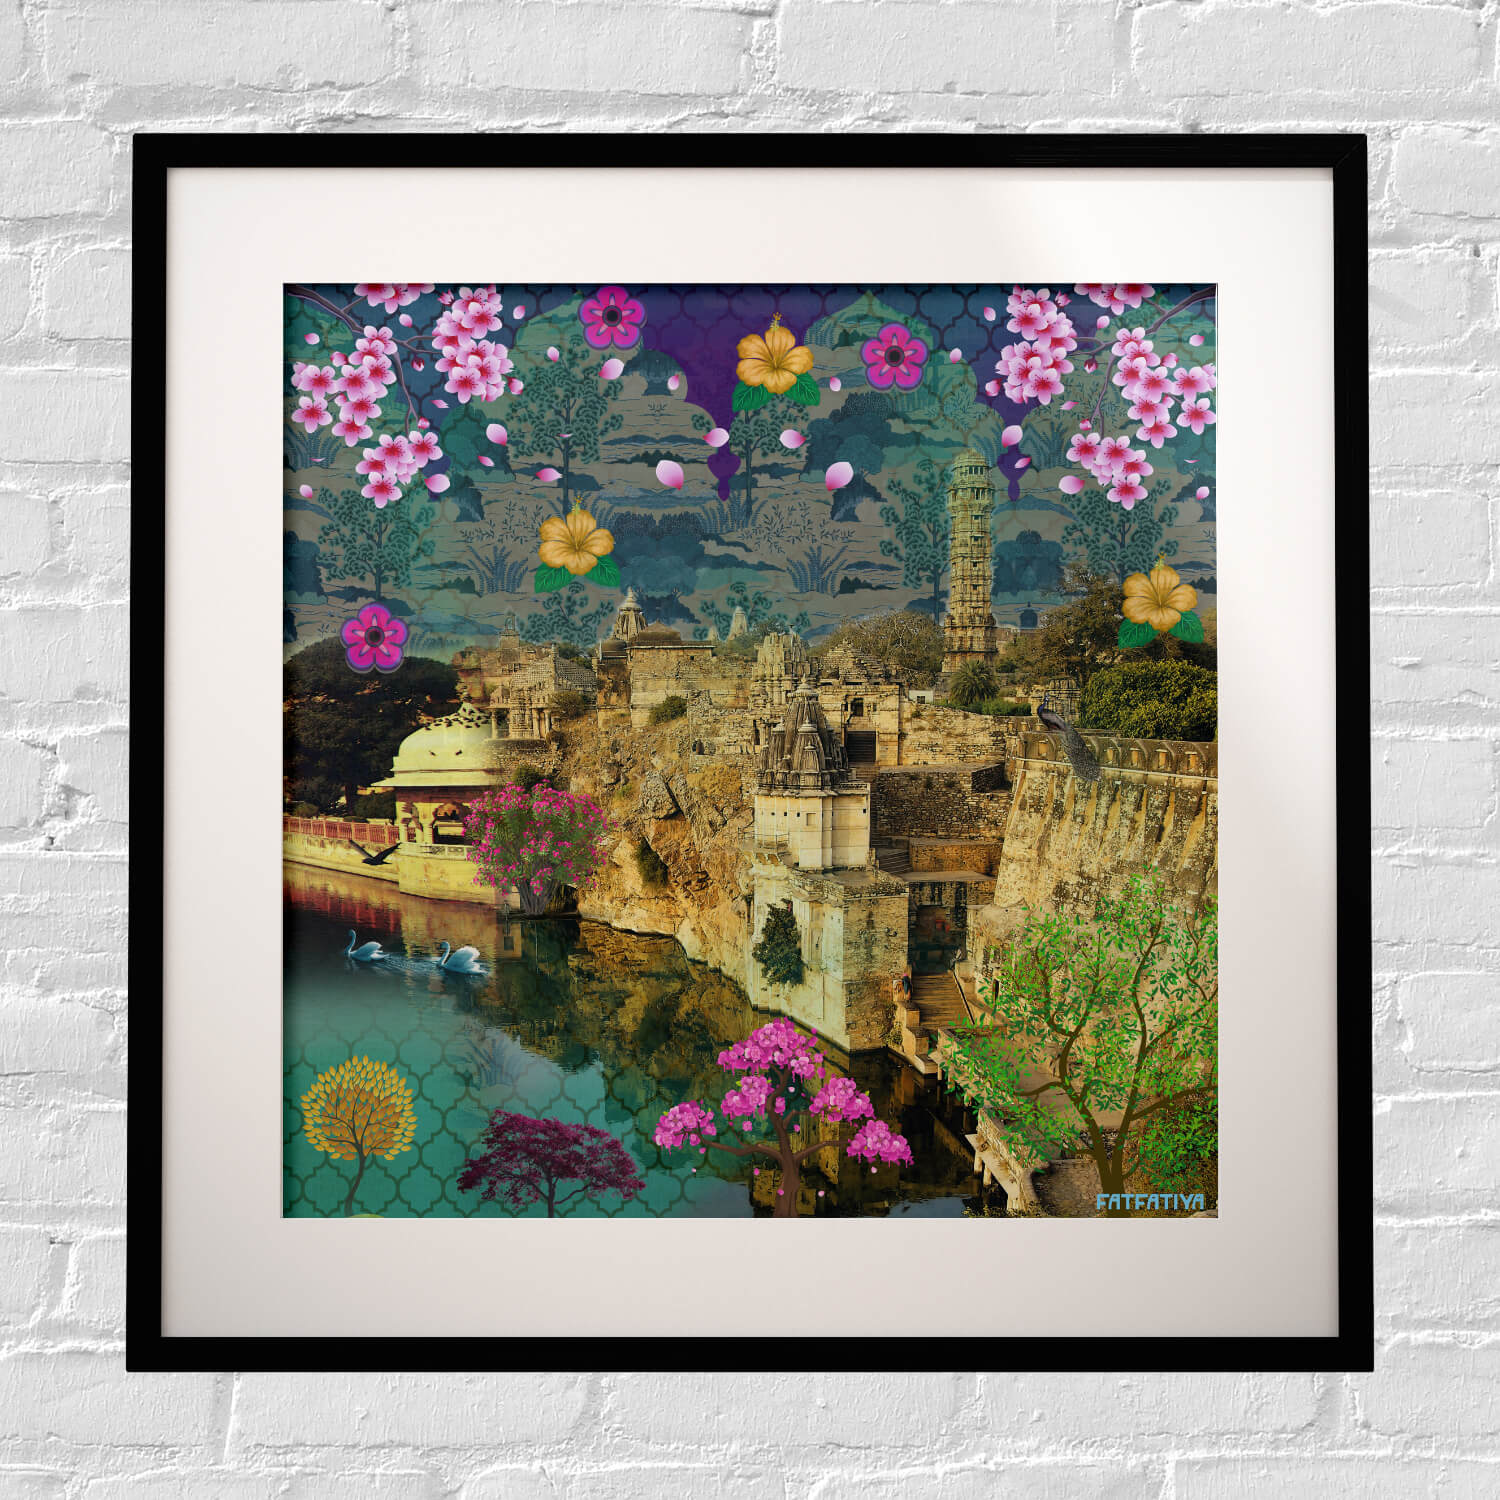 Buy Cheap Wall Art Online in India